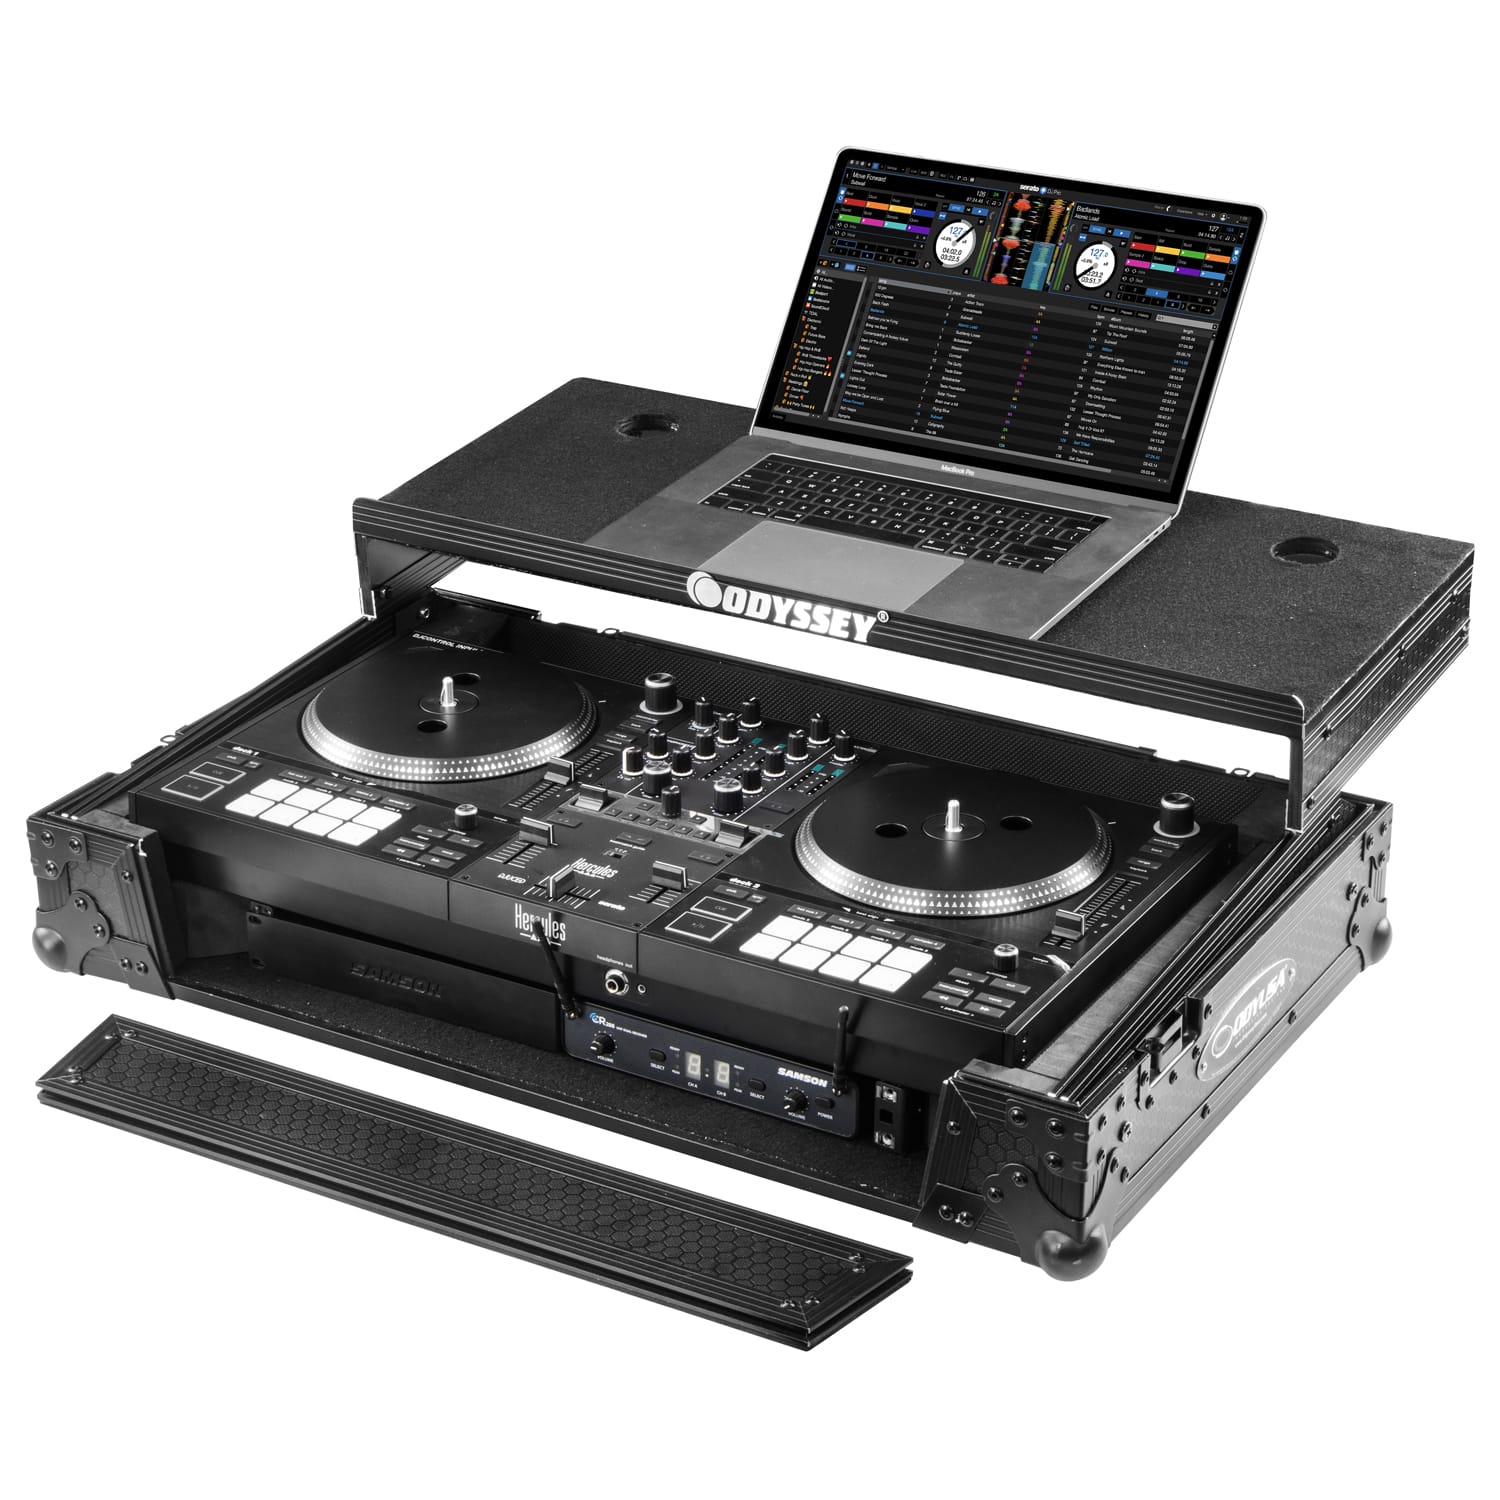 Odyssey Case 2 Tier Dj Equipment Foldable Adjustable Portable X Stand Combo  Pack With Mic Boom And Top Laptop Computer Shelf, Black : Target